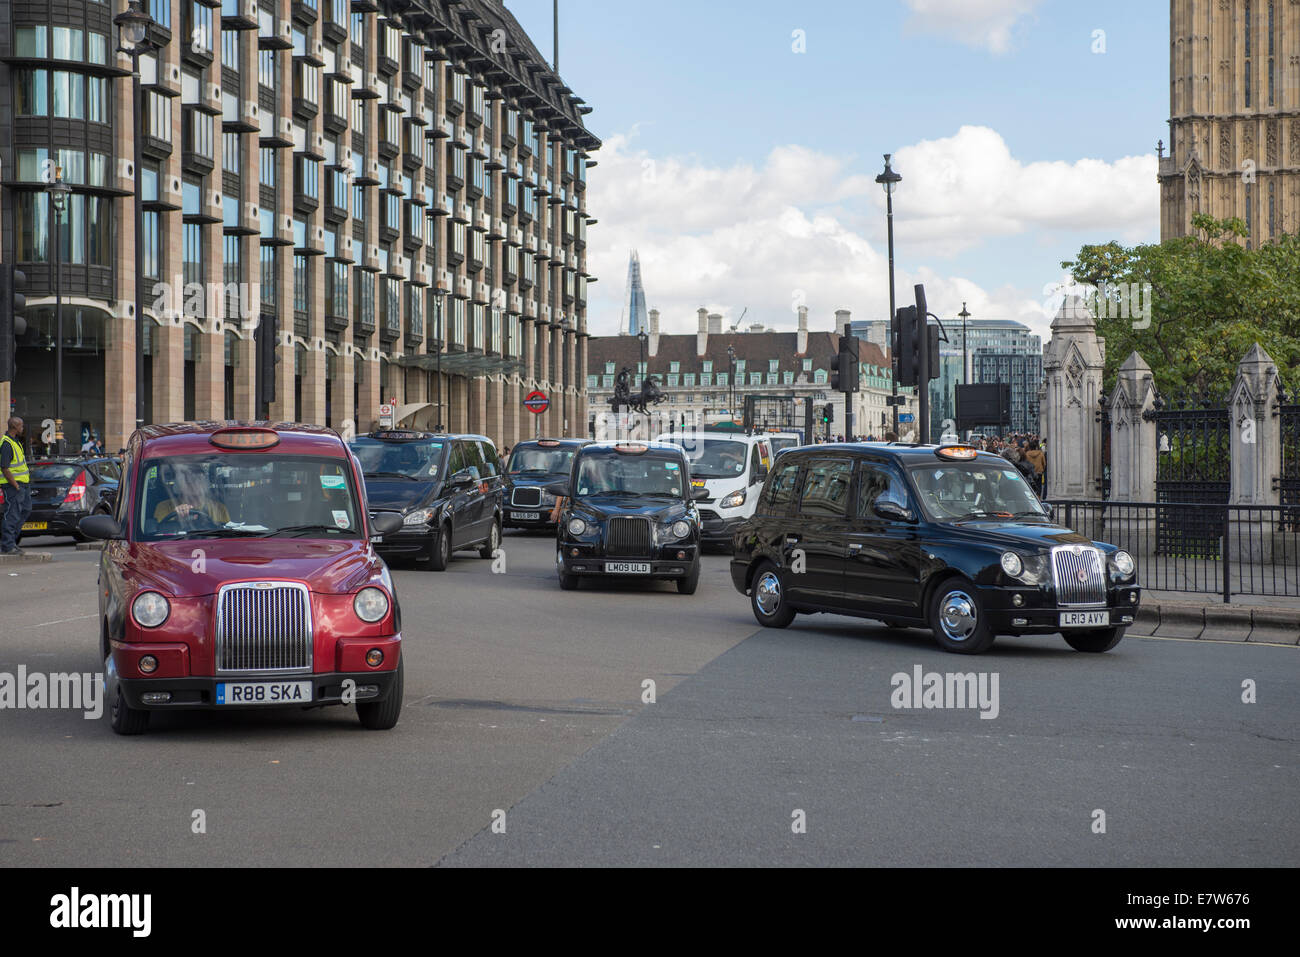 Central London, UK. 24th September 2014. Black cab taxi drivers protest TfL’s taxi policies today by driving in central London at a snails pace around 2pm. Areas affected are around Parliament Square, Whitehall and Trafalgar Square. Taxis start to arrive before 2pm. Credit:  Malcolm Park editorial/Alamy Live News. Stock Photo